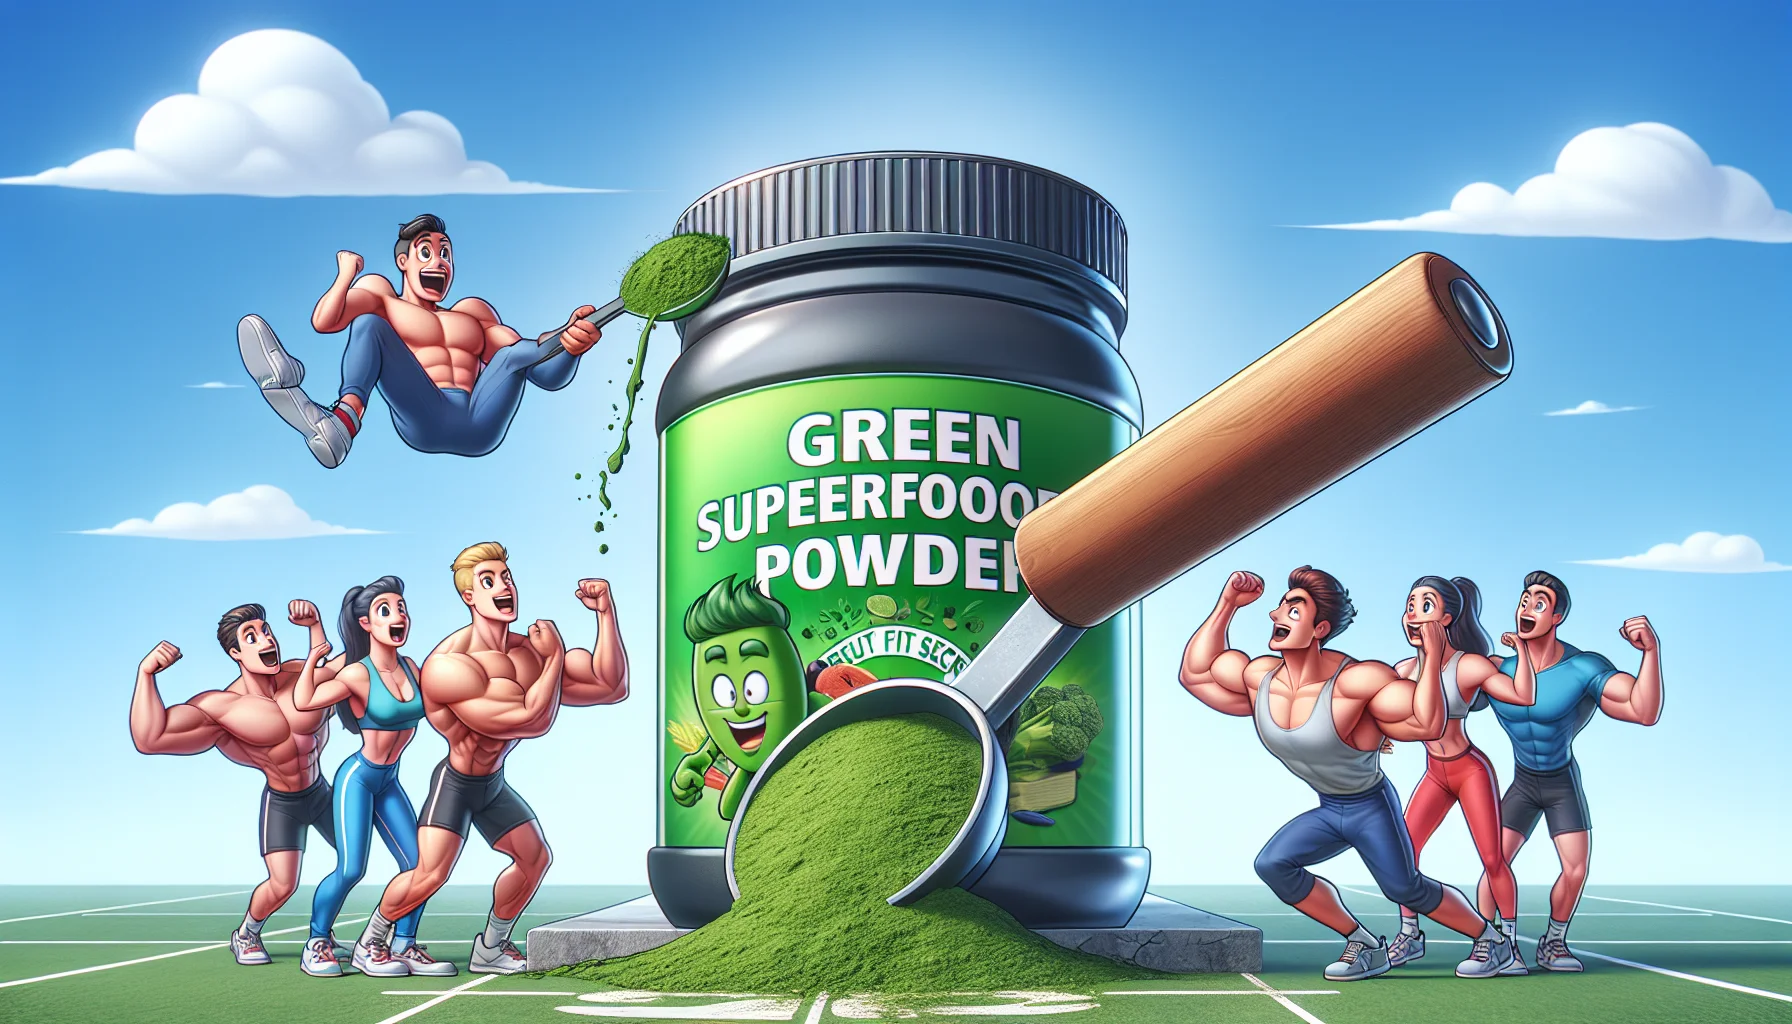 Create a comedic, visually enticing scene promoting the effective use of green superfood powders for athletic excellence. The scene should have a playful tone. Picture a lever being pulled to unveil a giant container of green superfood powder with a label stating 'Best Fitness Secret'. Animated human characters of various descents like Caucasian, Hispanic and Middle-Eastern, both male and female, are awestruck witnessing the reveal. They are dressed in bright sportswear, their expressions full of enthusiasm and motivation to exercise. On the side, there should be a depiction of a humorous mascot character flexing its muscles while holding scoop of green superfood powder, symbolizing the energy-boosting effect of the product.